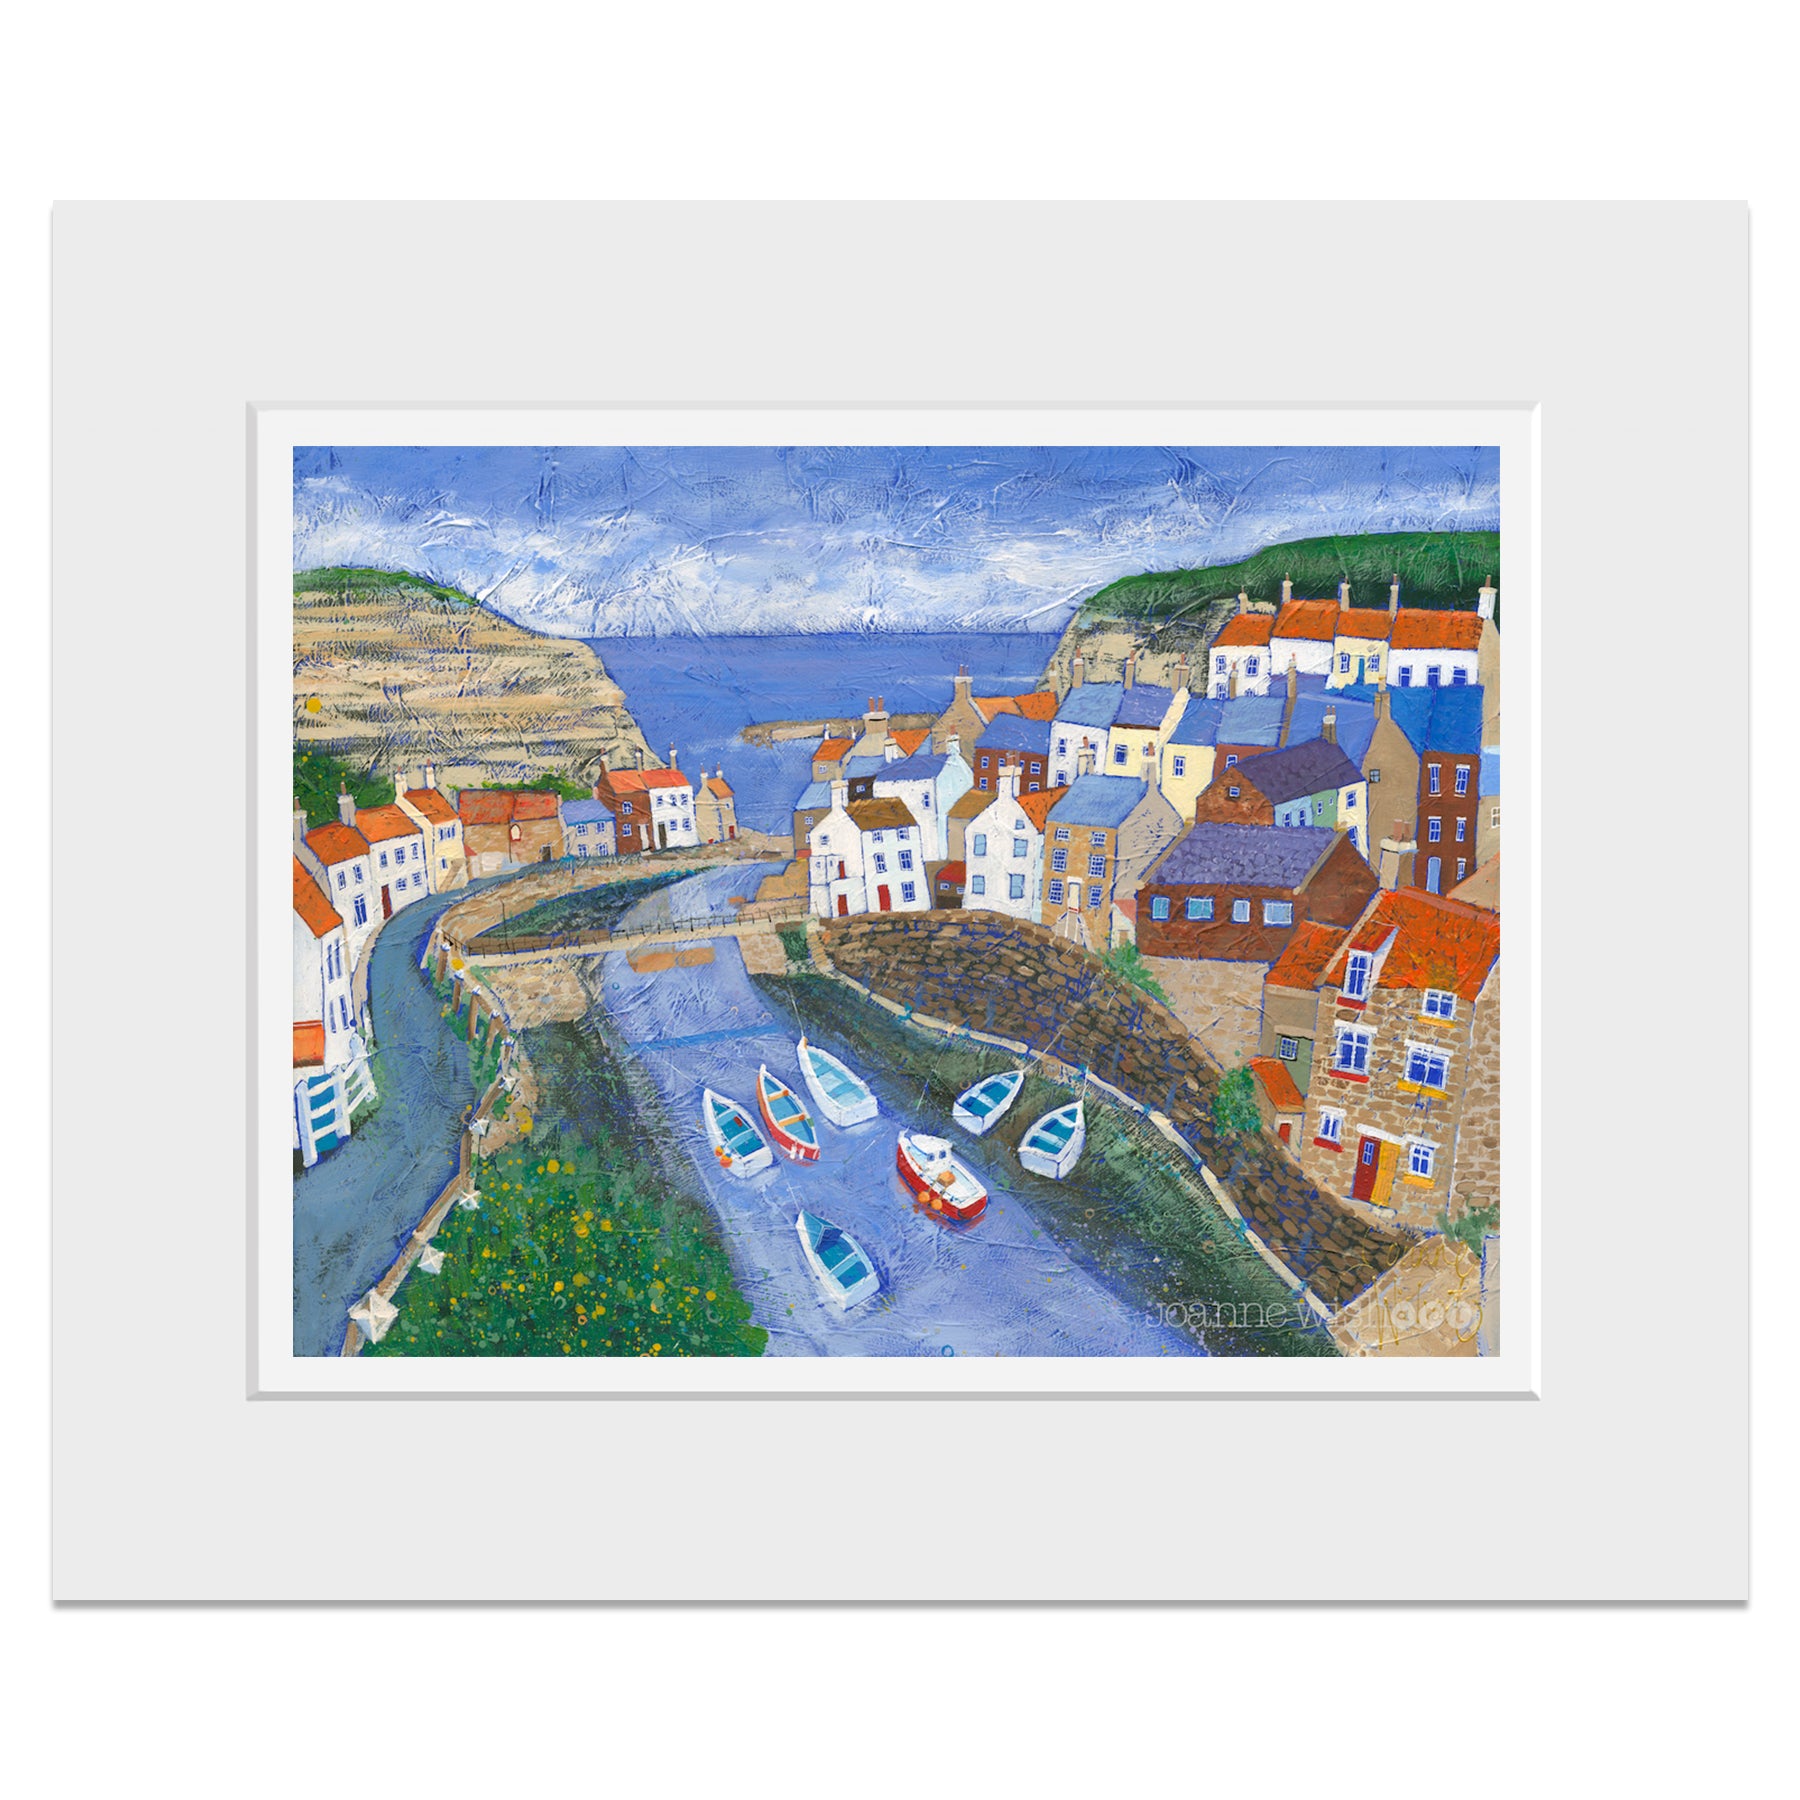 A mounted print of Staithes village looking down the beck.